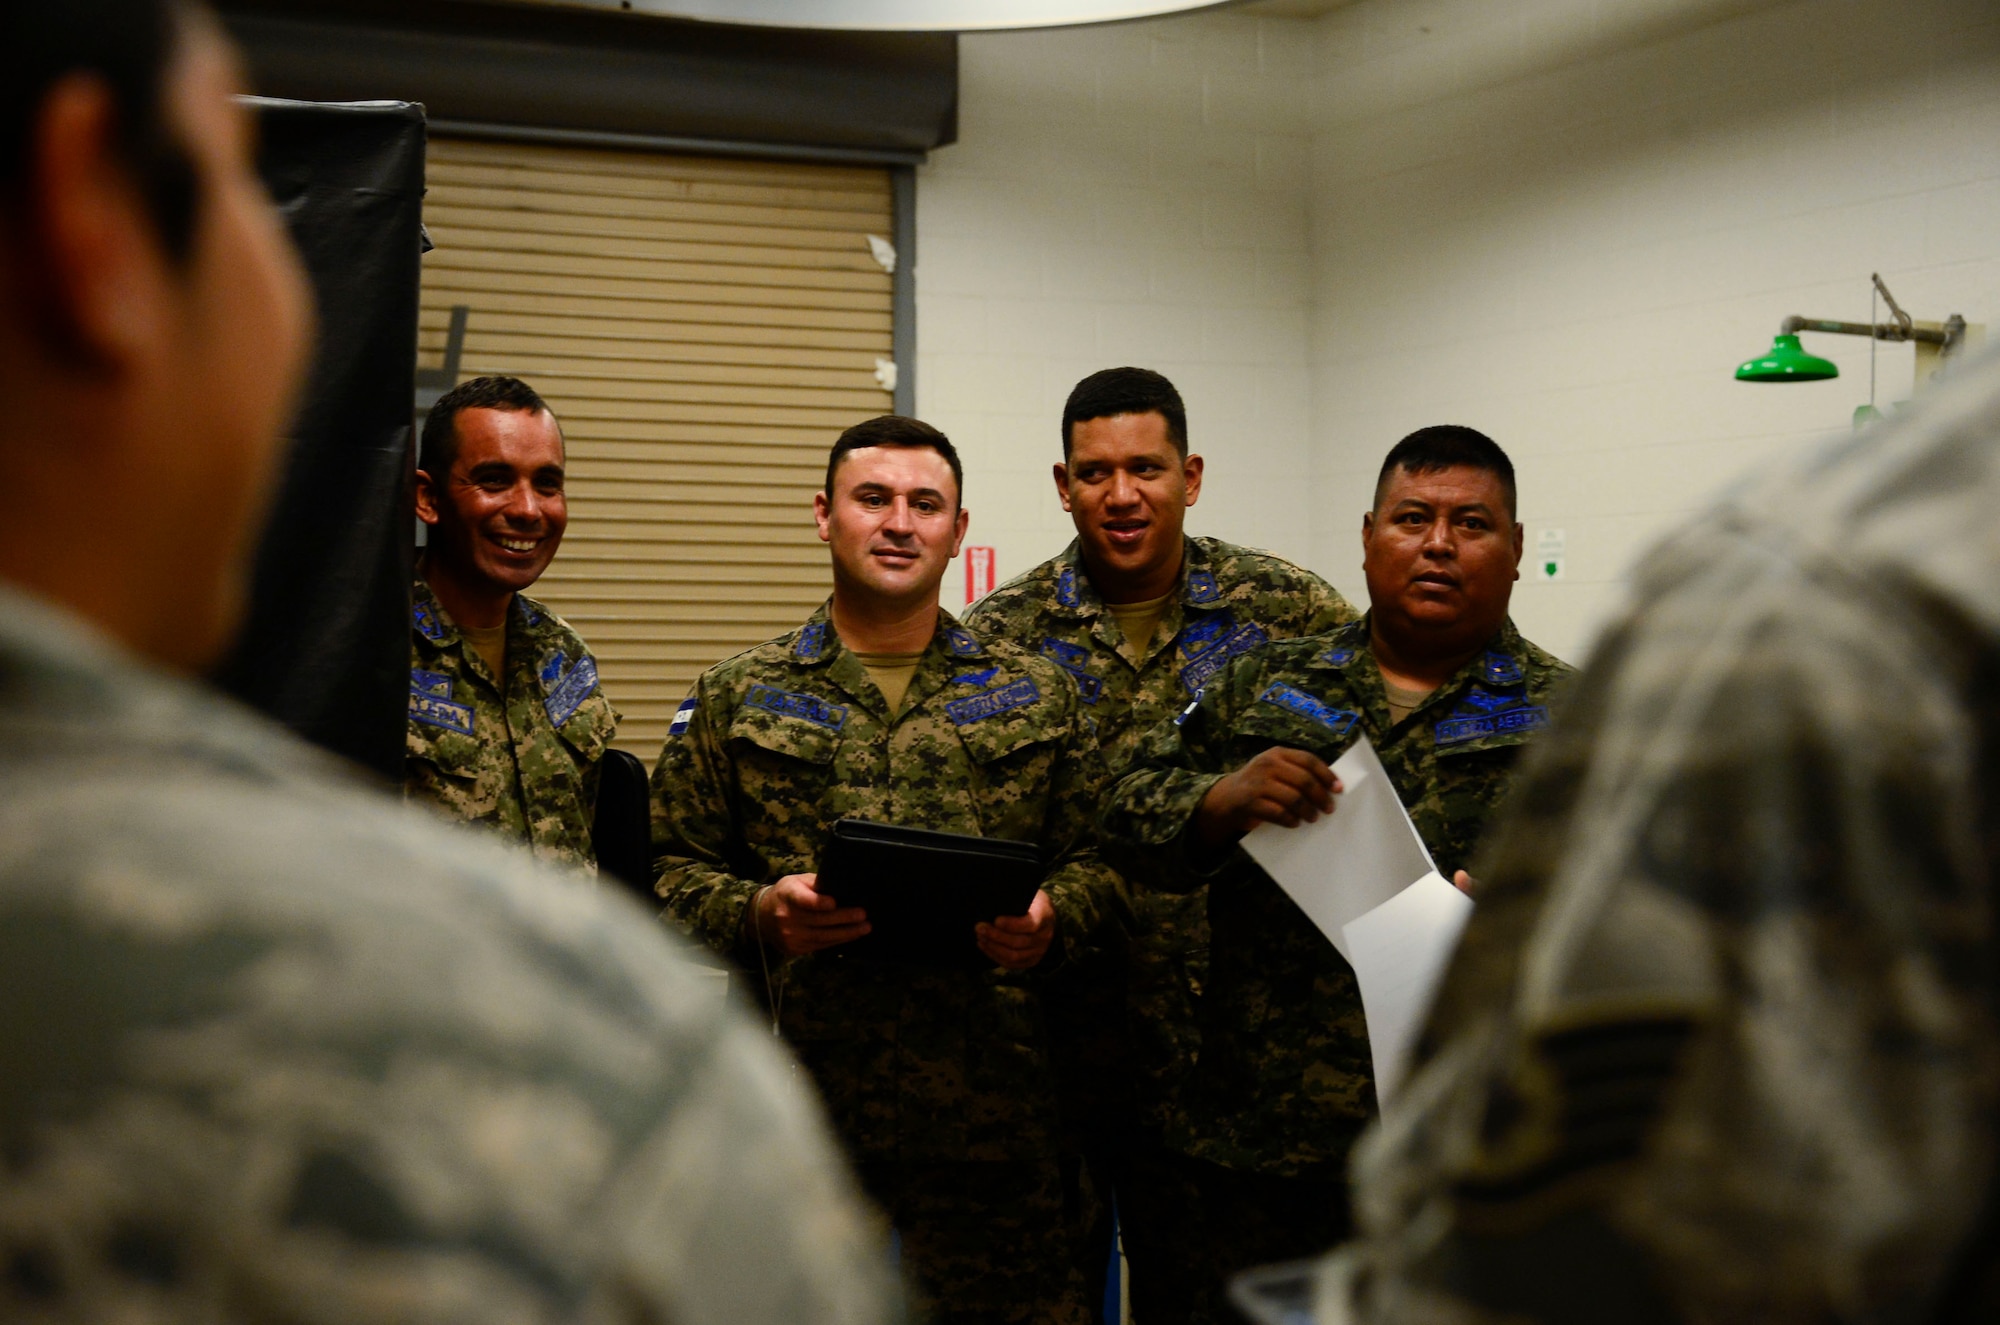 Members of the Honduran air force meet with the Airmen at the 355th Equipment Maintenance Squadron nondestructive inspections lab during a subject matter expert exchange event on Davis-Monthan AFB, Ariz., Aug. 19, 2015. Five members from the Honduran air force teamed up with 12th Air Force (Air Forces Southern) and the 355th EMS for a subject matter expert exchange that focused on a variety of nondestructive inspections lab processes and maintenance safety standards. (U.S. Air Force photo by Tech. Sgt. Heather Redman/Released)